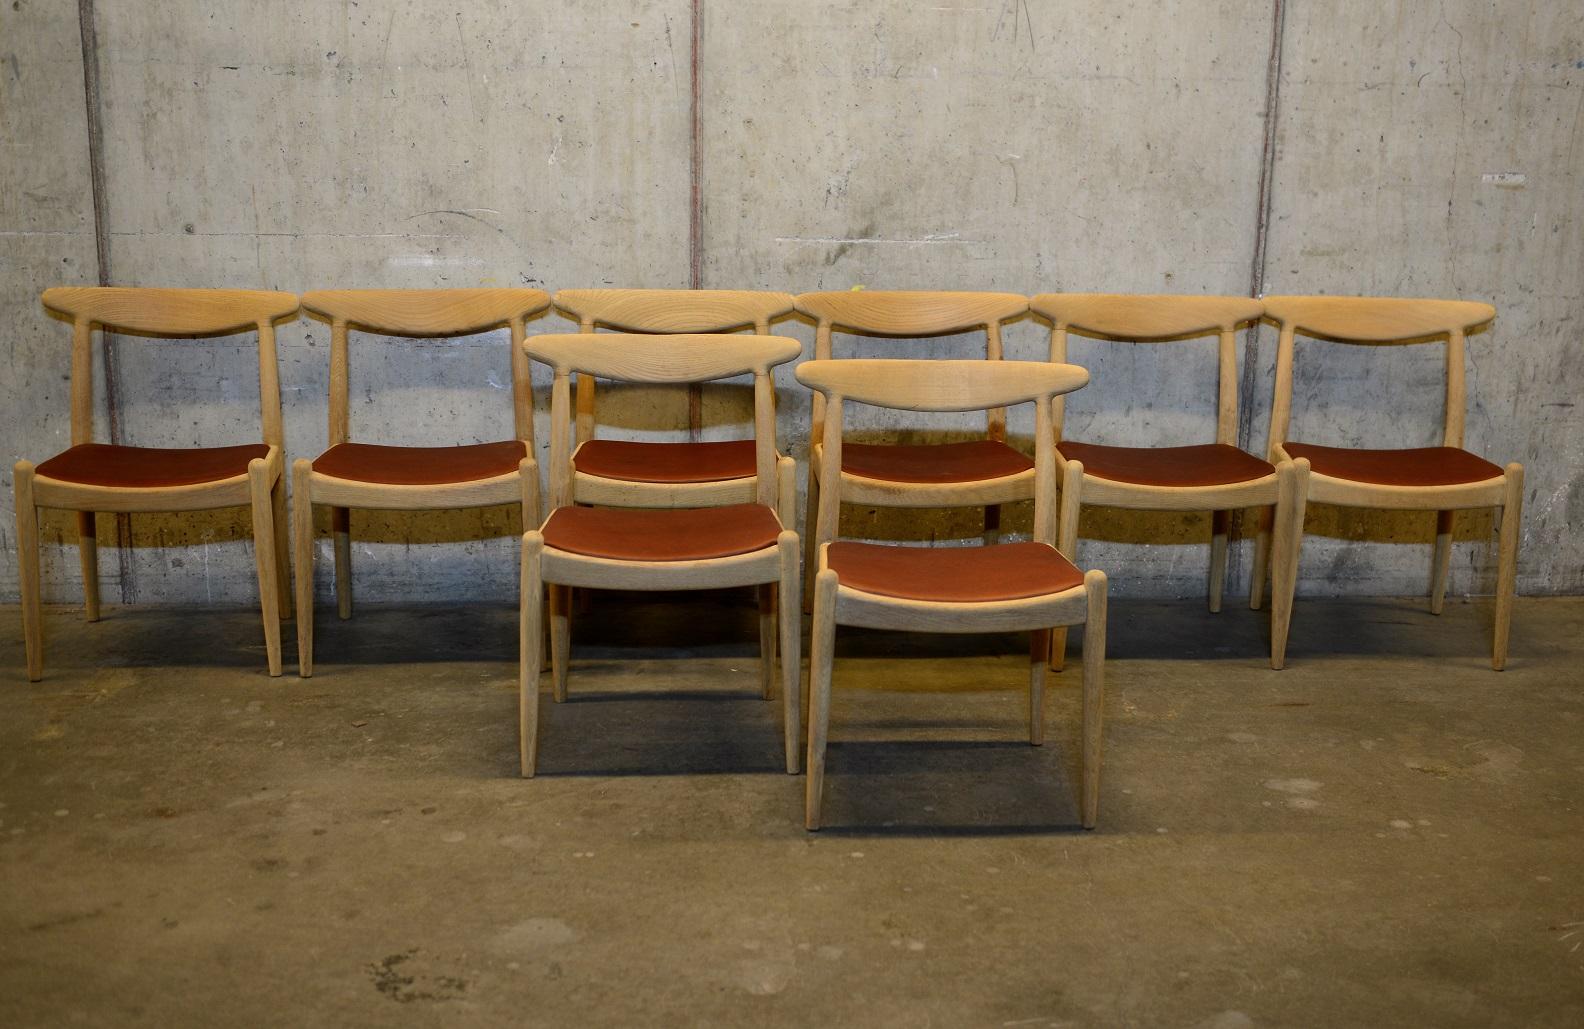 Scandinavian Modern Set of 8 W1 Oak and Leather Chairs by Hans J. Wegner, 1950s, C.M. Madsens DK For Sale